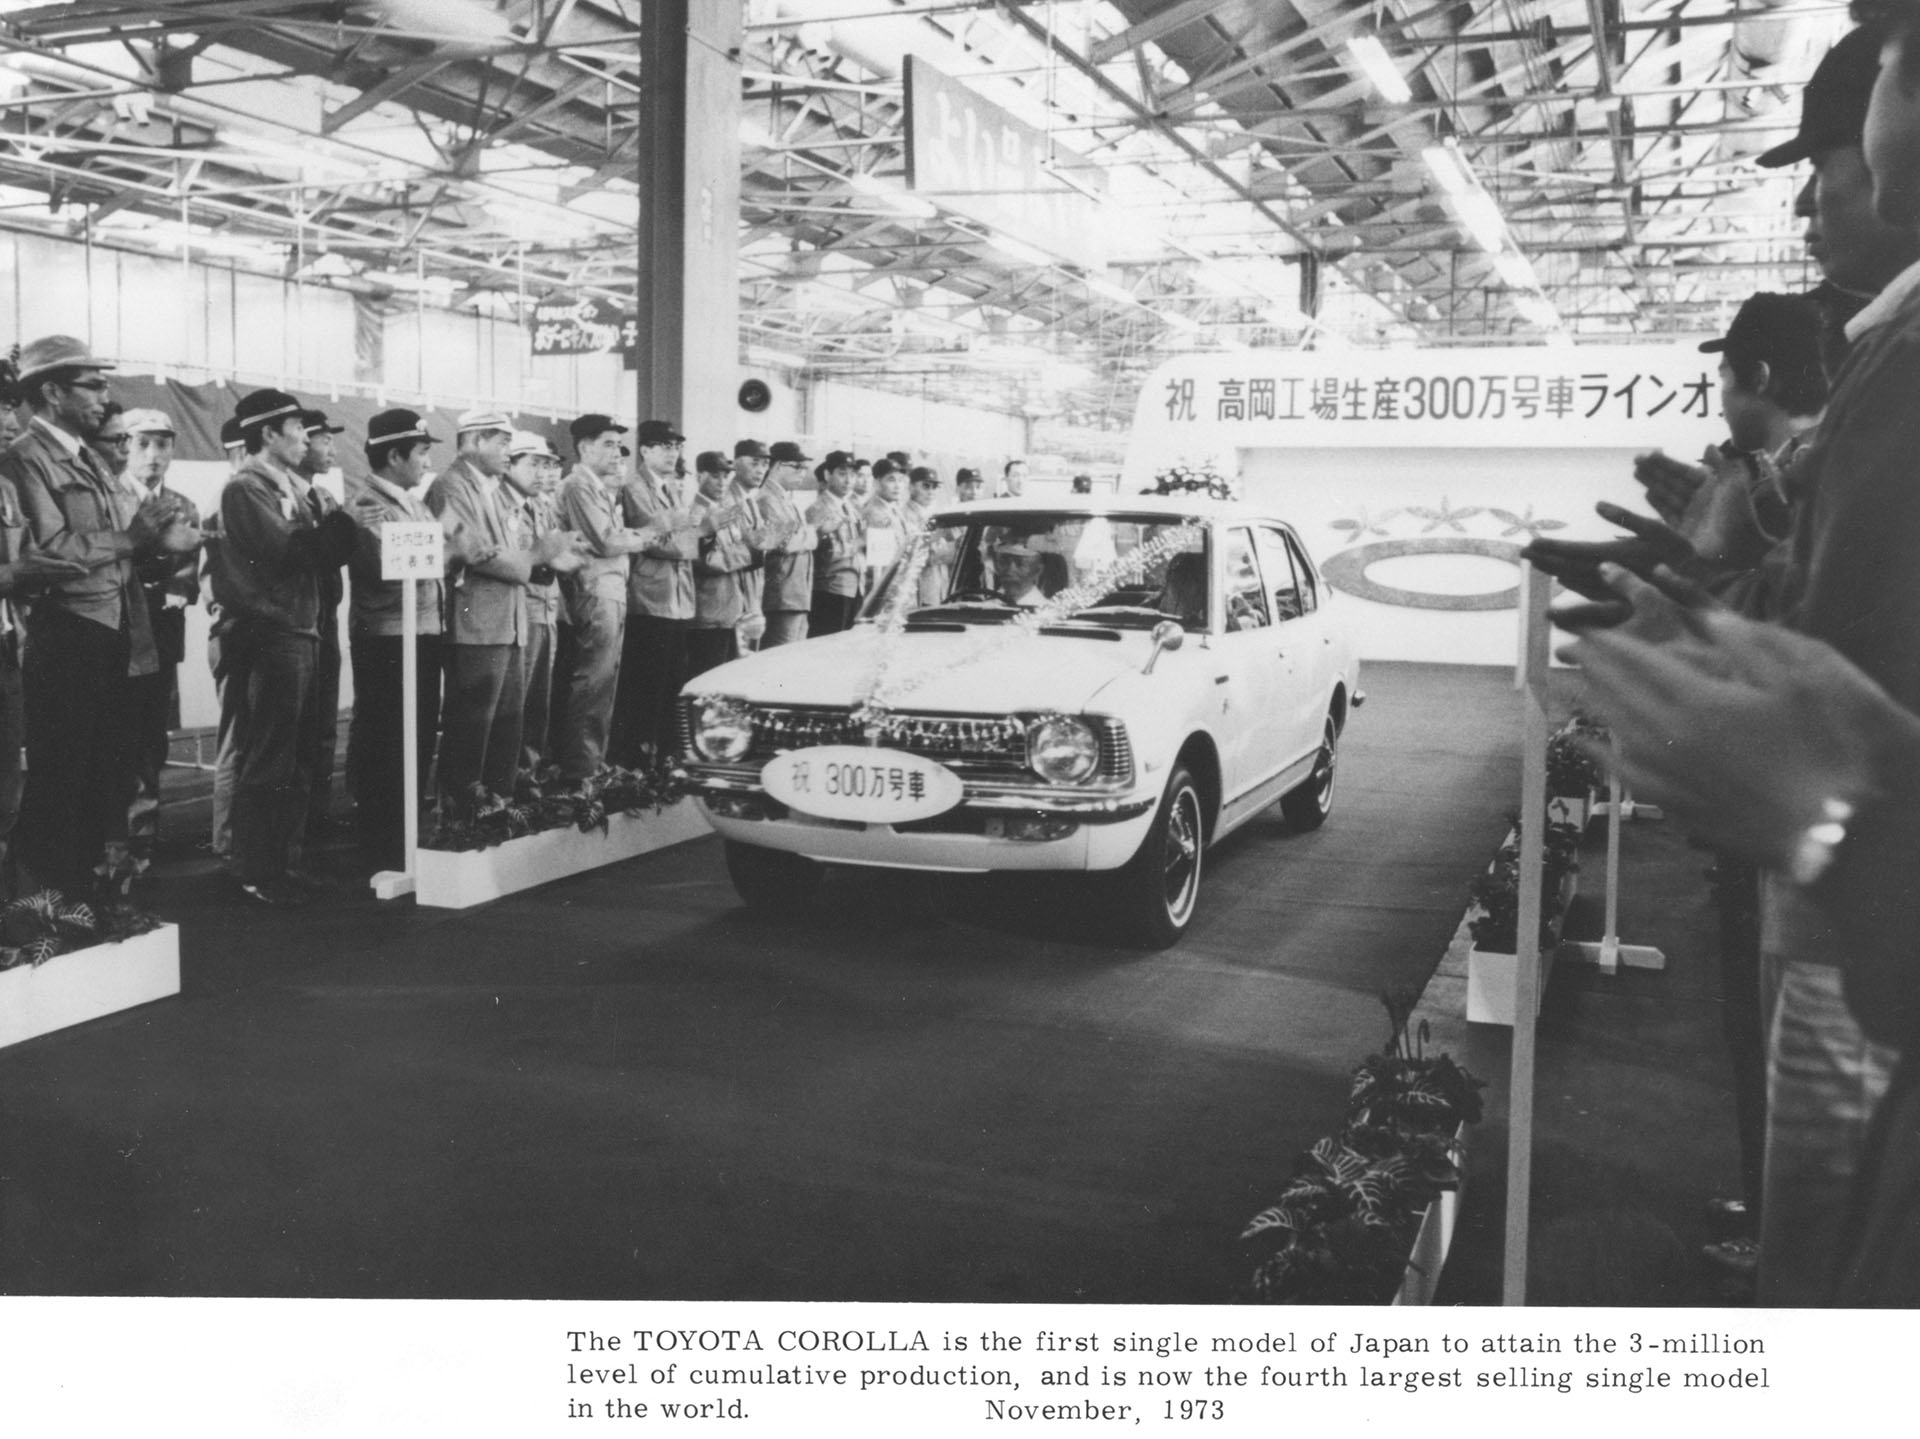 The TOYOTA COROLLA is the first single model of Japan to attain the 3-million level of cumulative production, and is now the fourth largest selling single model in the world. November, 1973